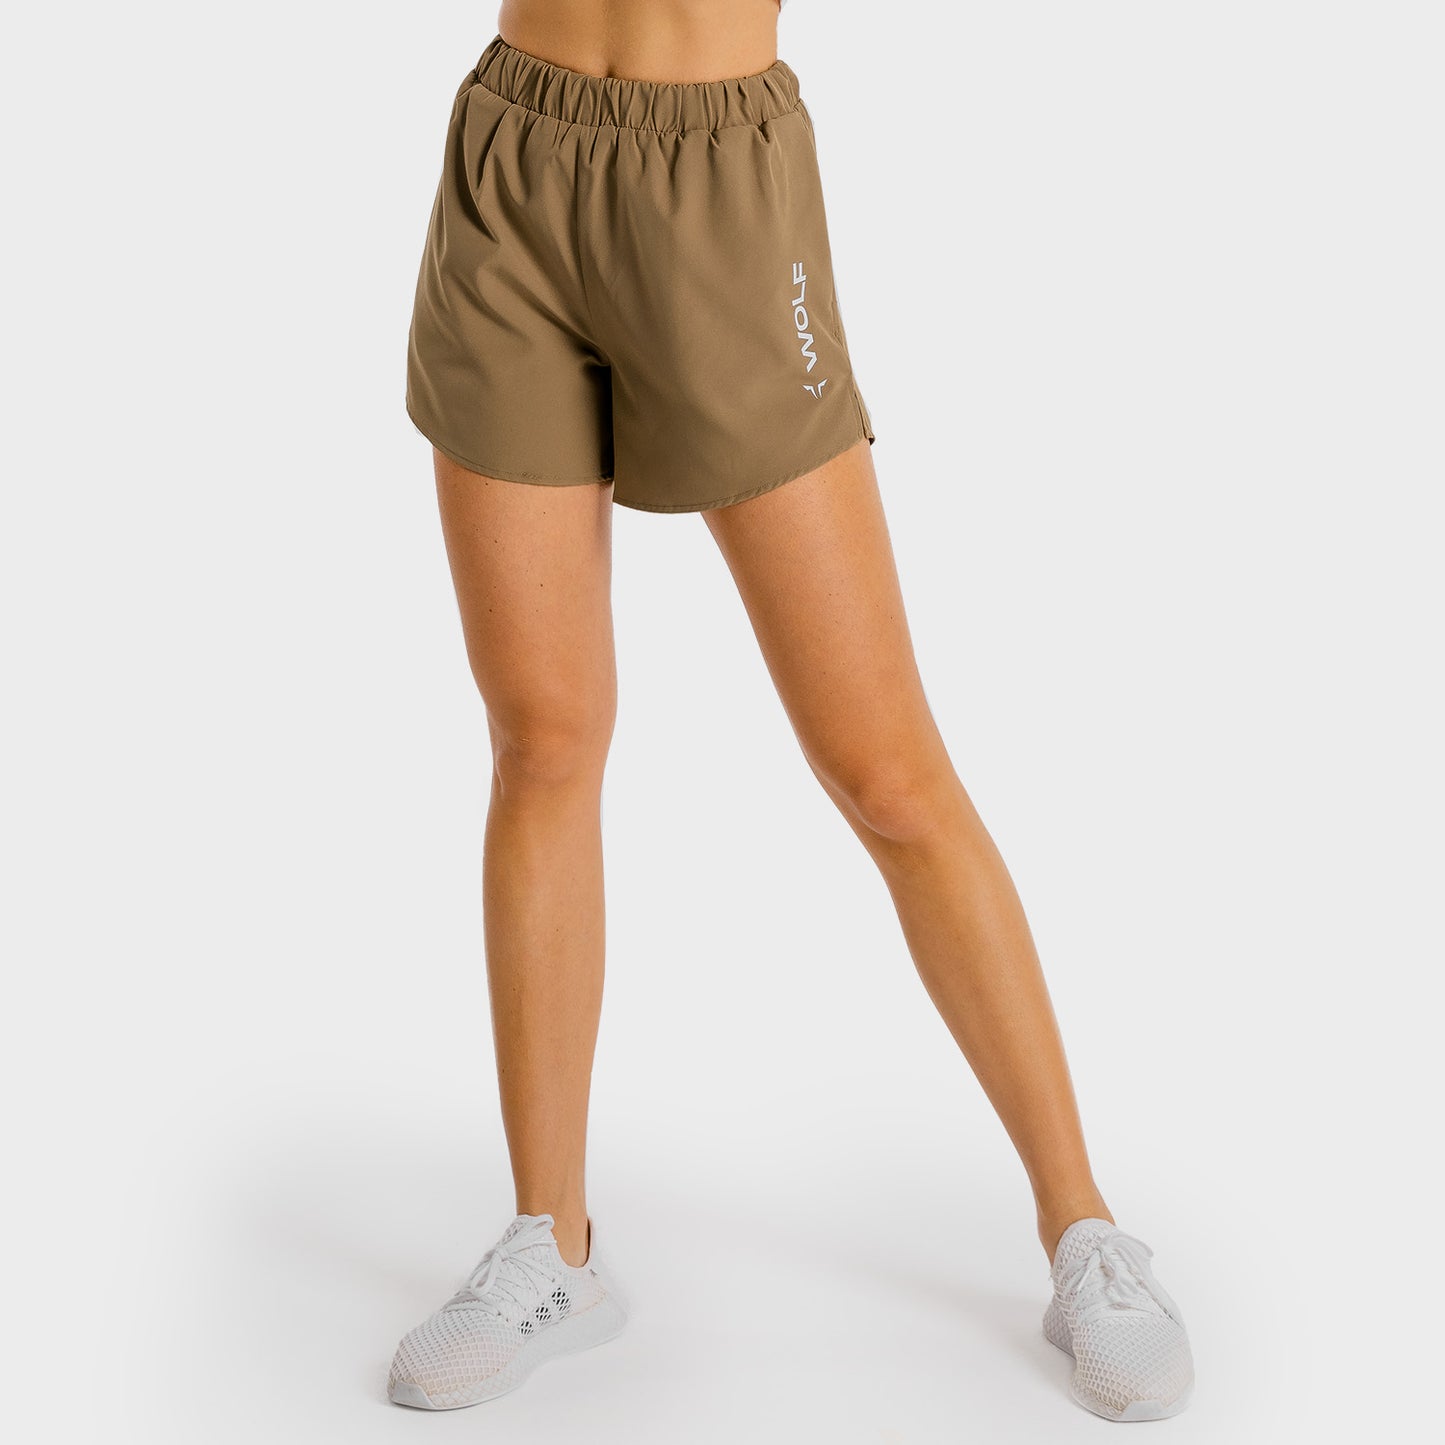 squatwolf-gym-shorts-for-women-primal-2-in-1-shorts-taupe-workout-clothes